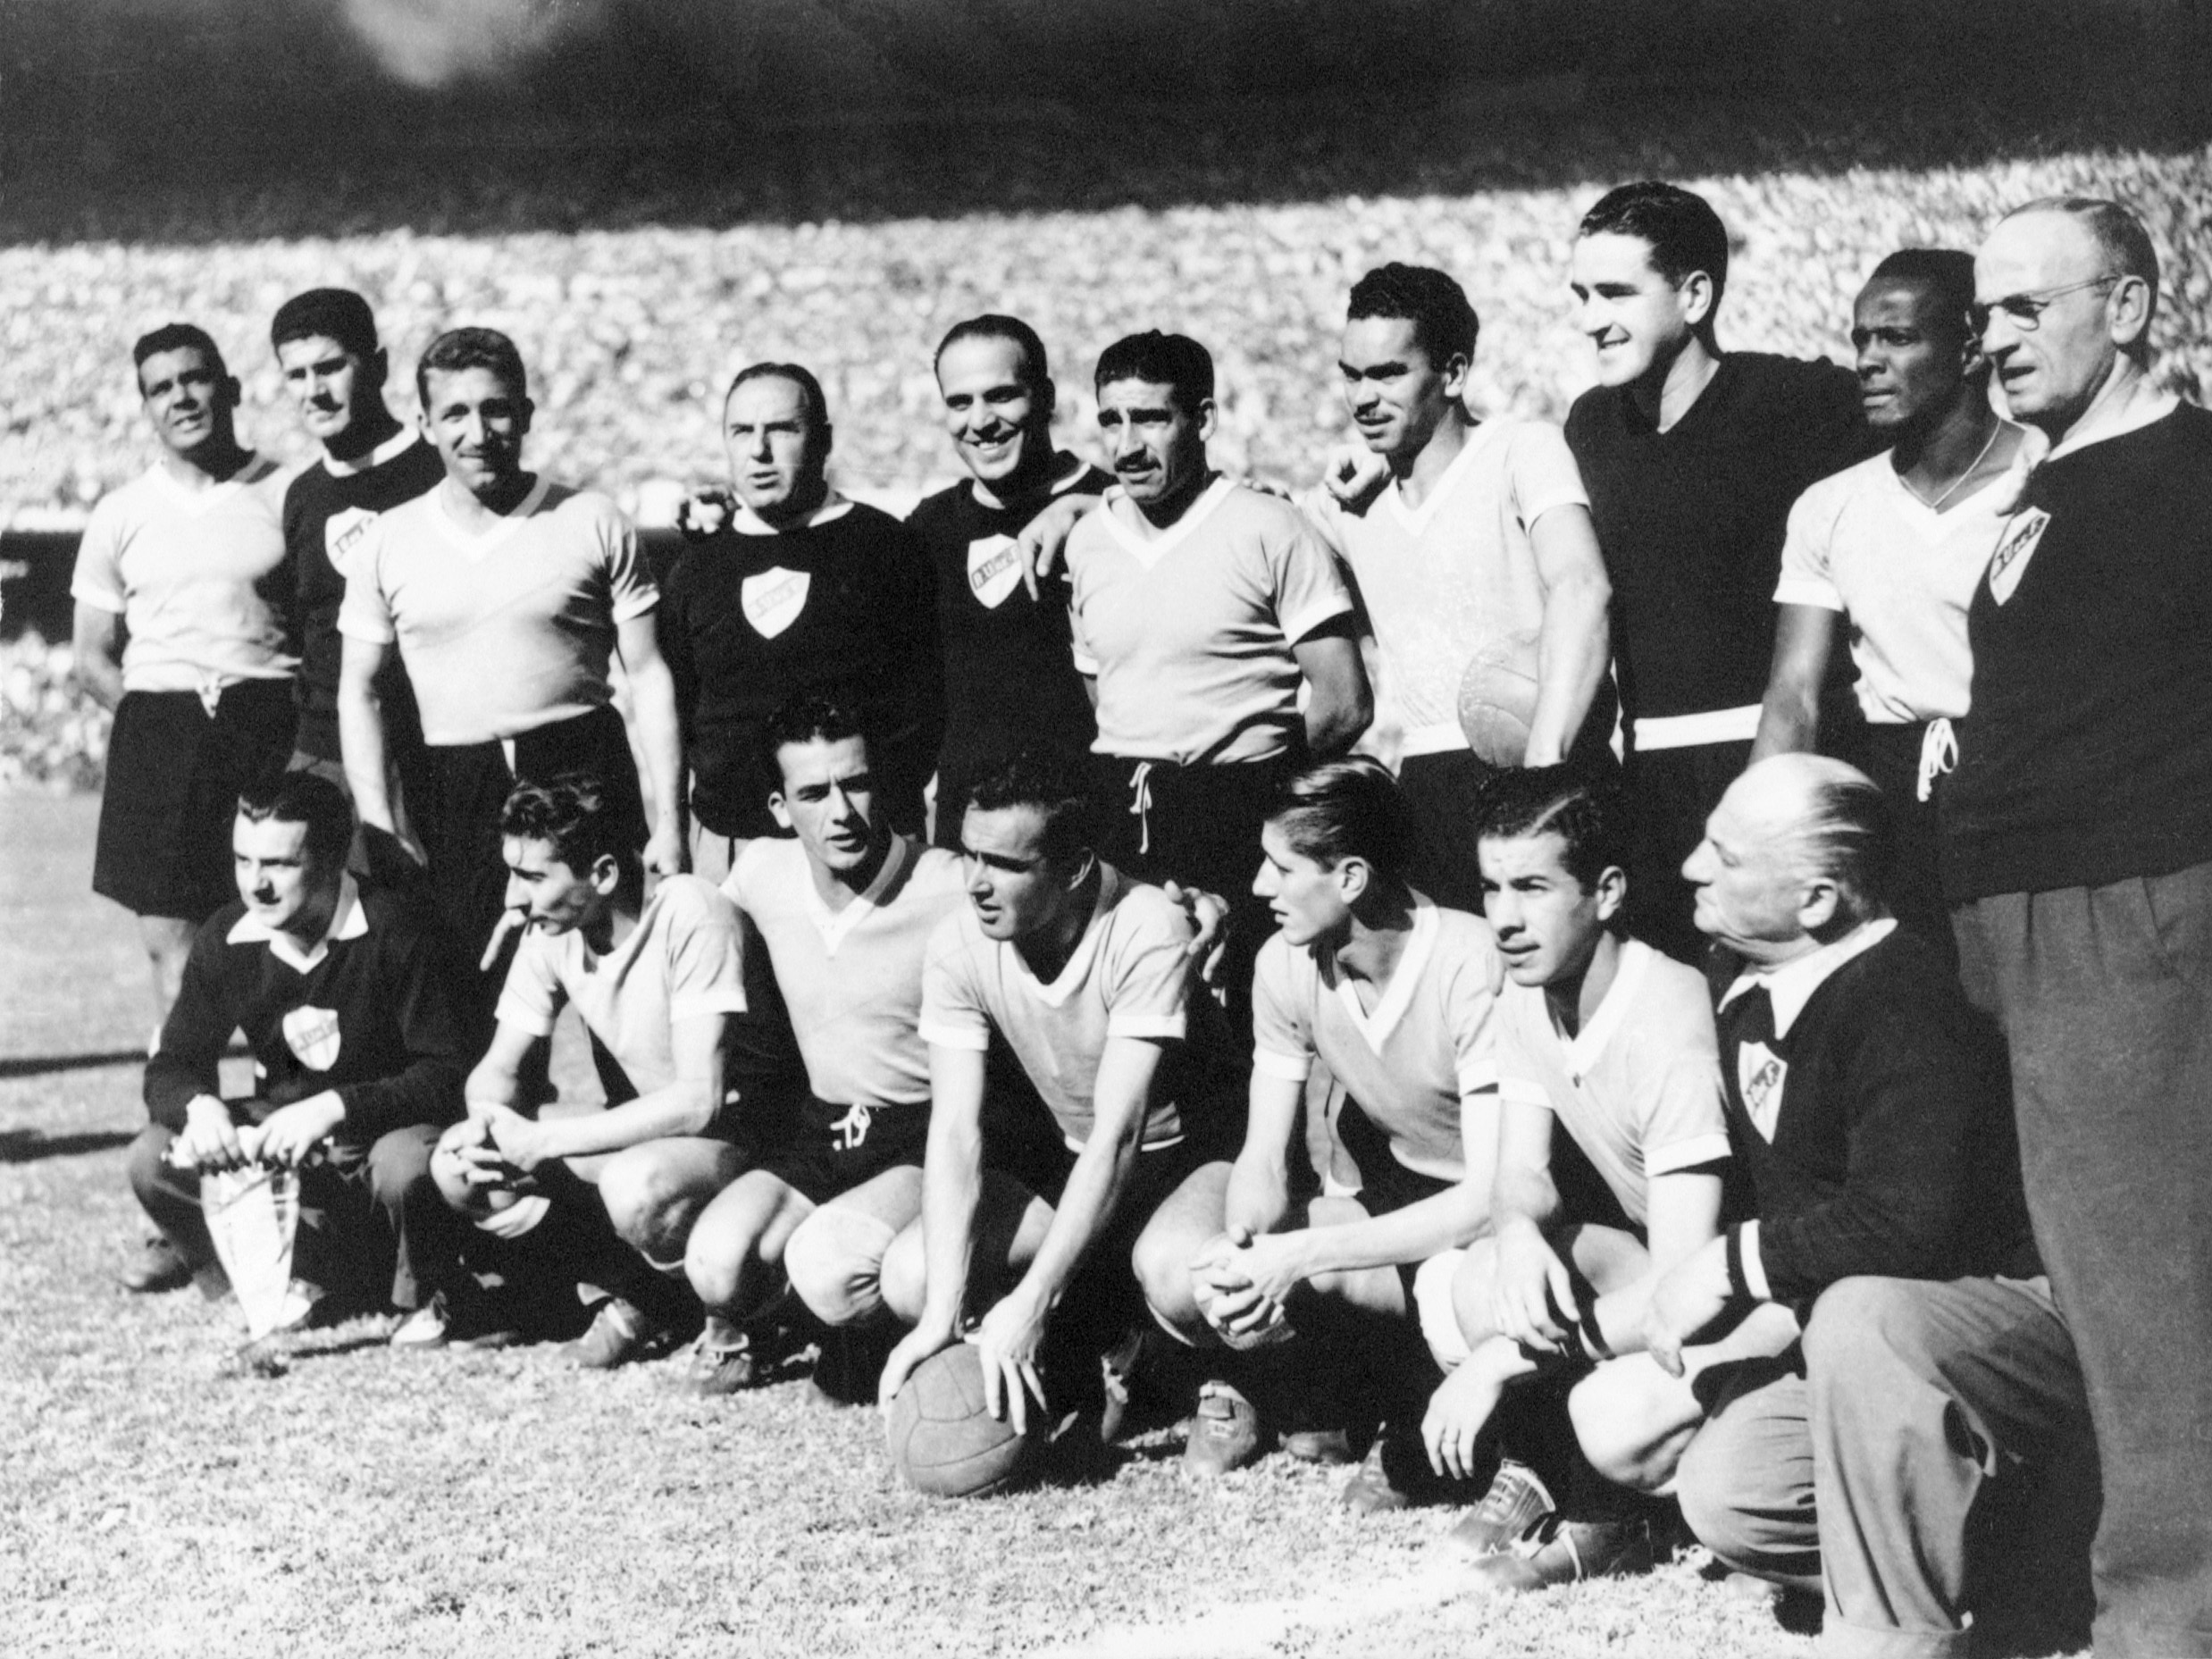 Uruguay at the 1950 World Cup